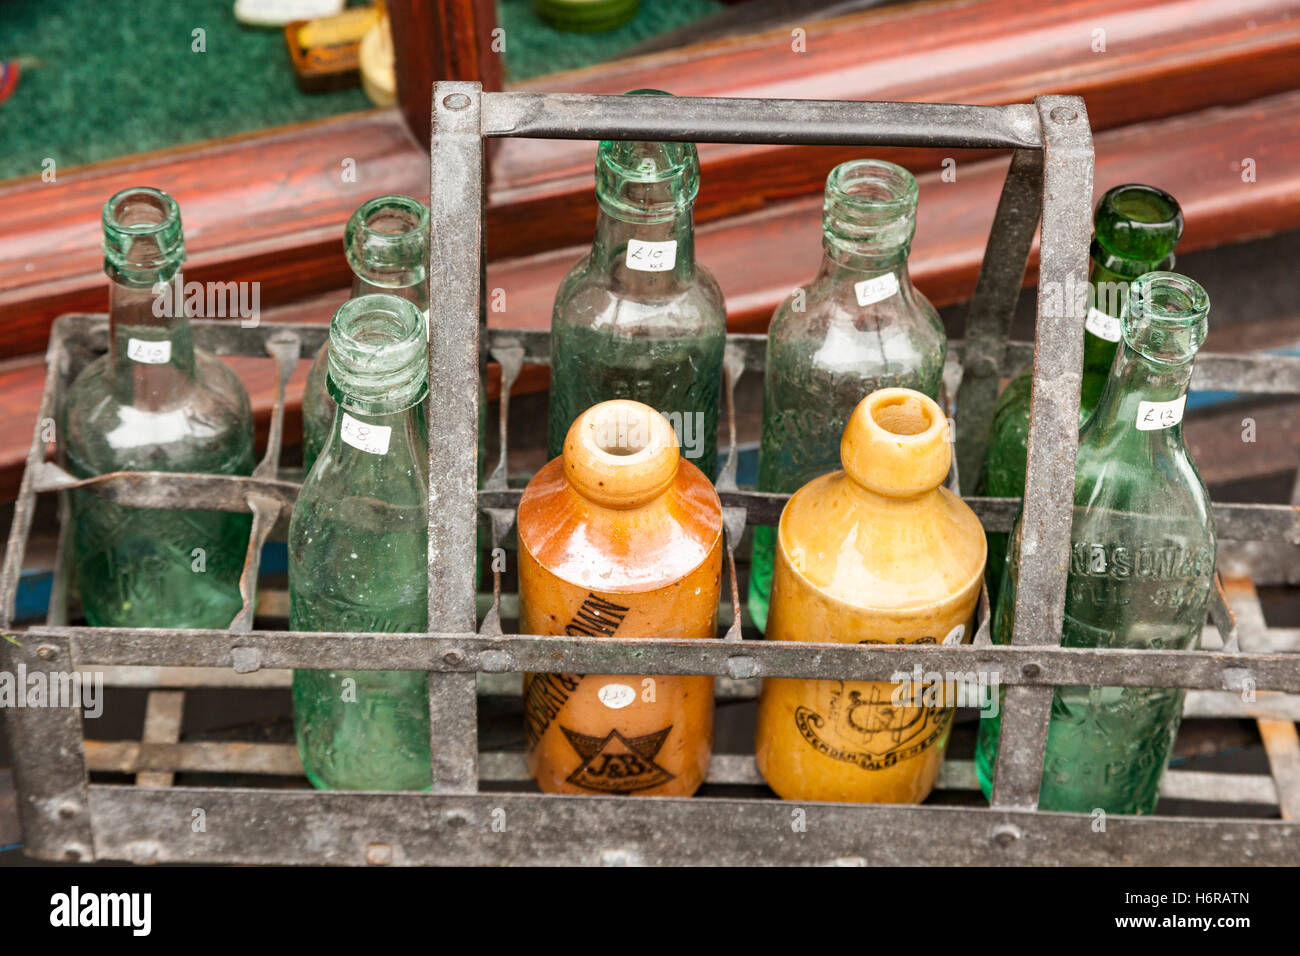 Crate of antique bottles outside an antique shop, Keswick, Cumbria, England Stock Photo